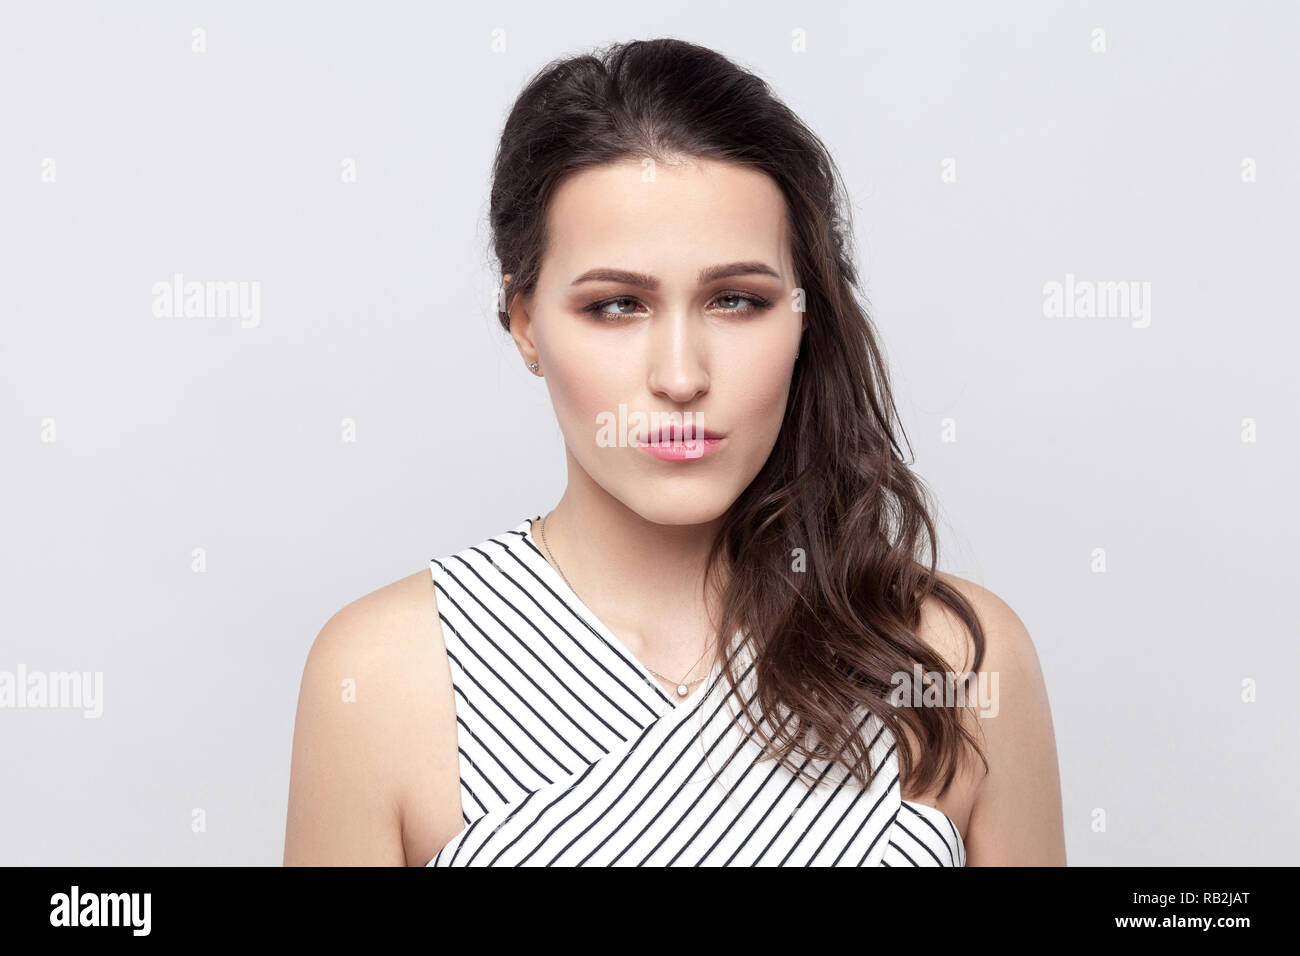 Portrait of crazy funny beautiful young brunette woman with makeup and striped dress standing and looking at camera with crossed eyes. indoor studio s Stock Photo